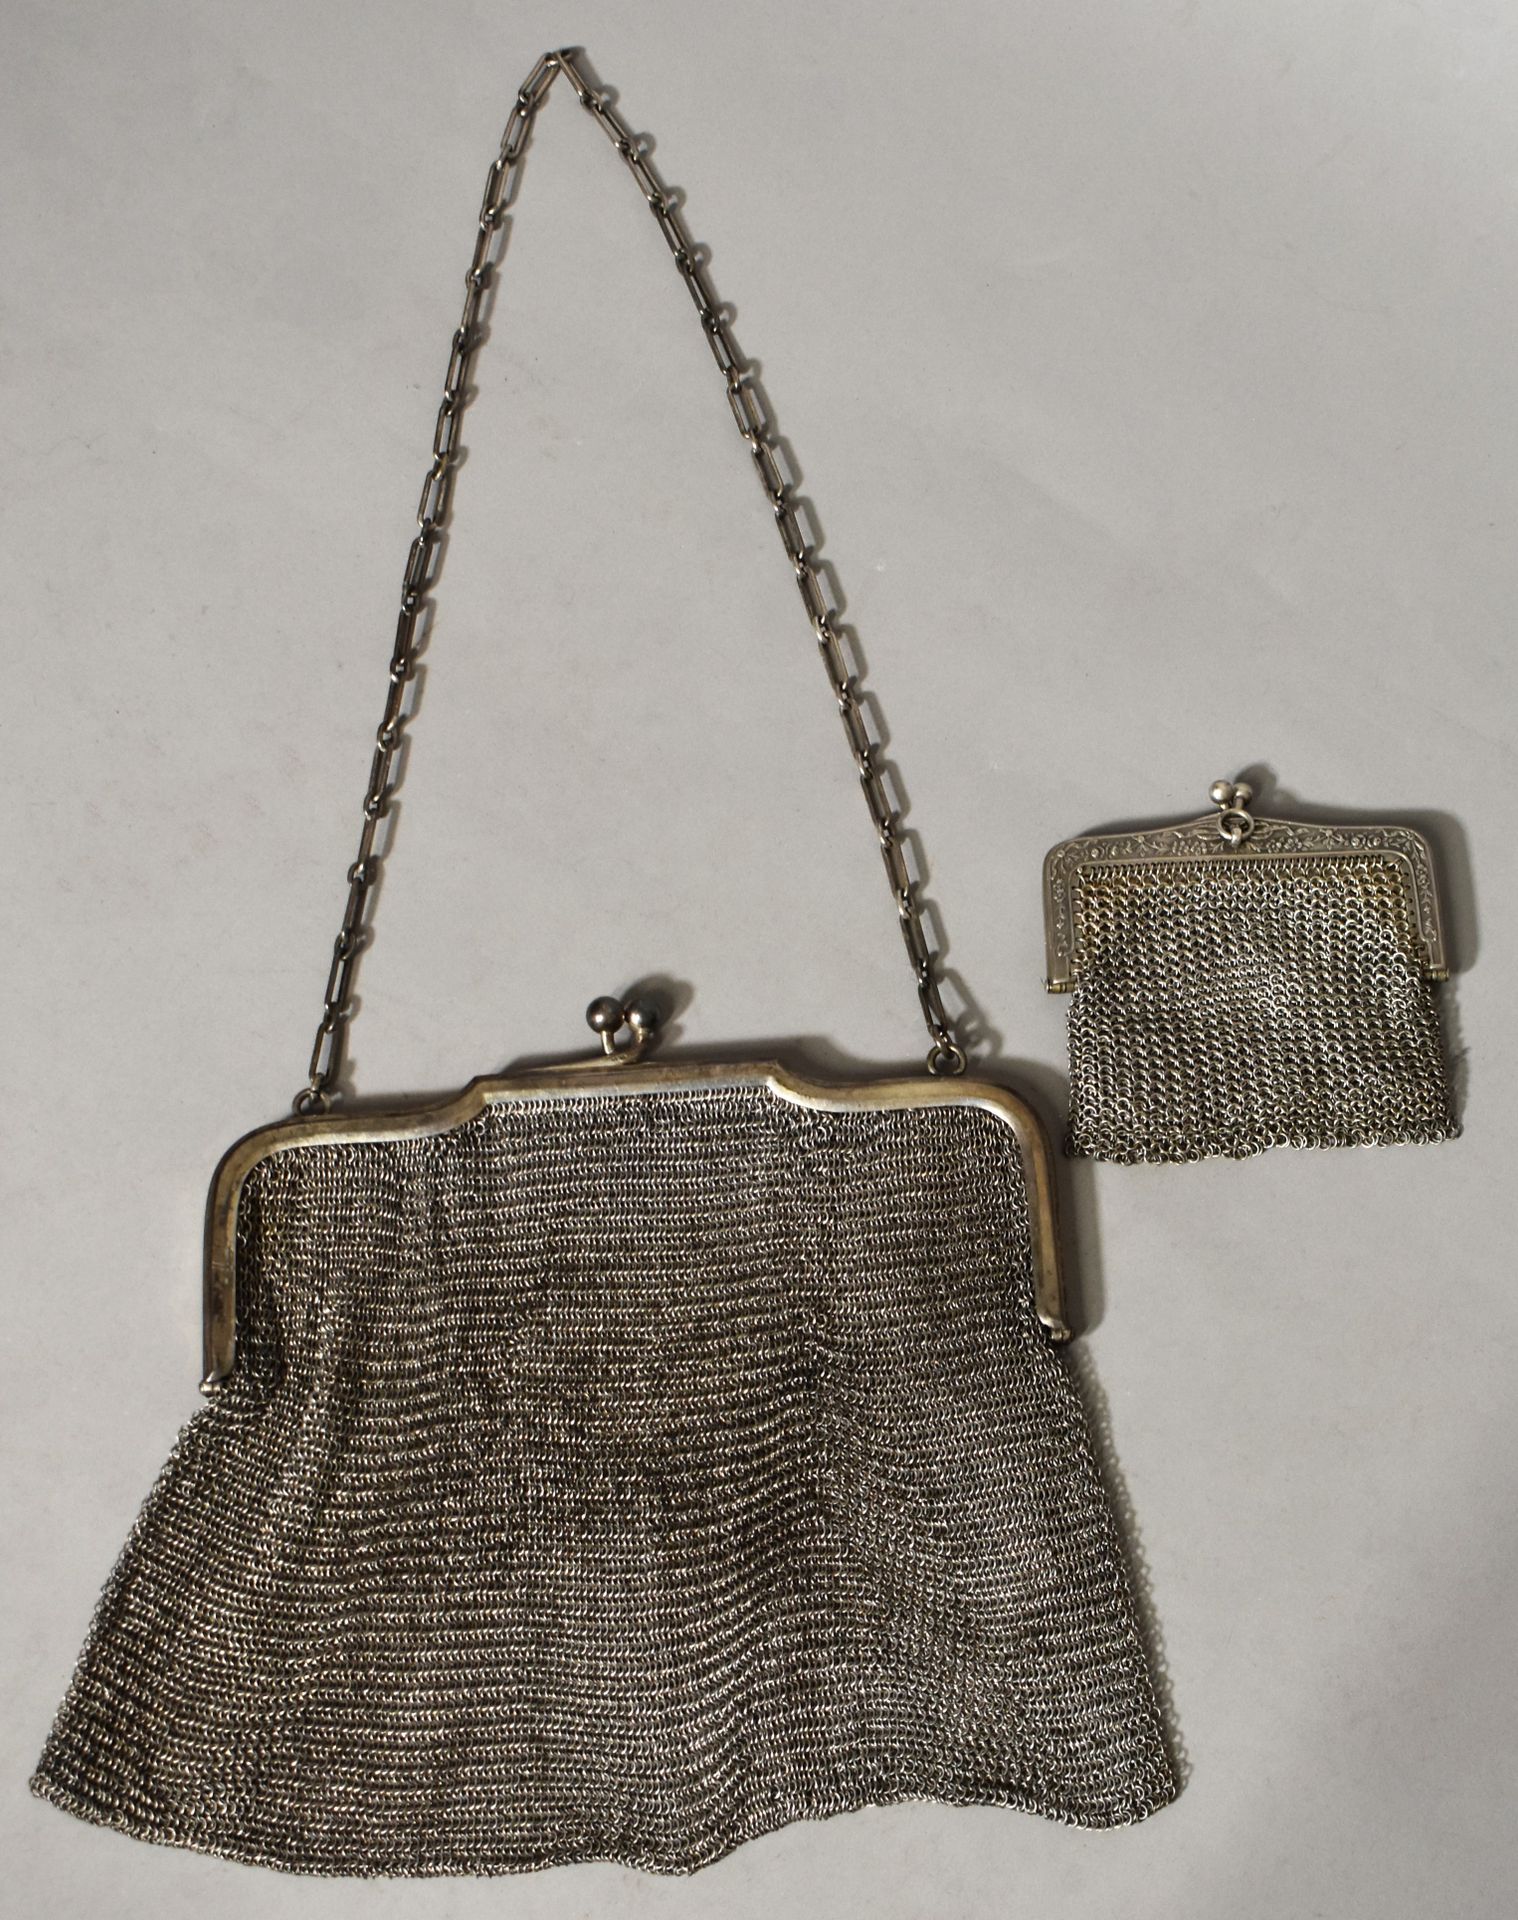 Null HANDBAG and HANDKERCHIEF in silver mesh. Total weight 250 g.